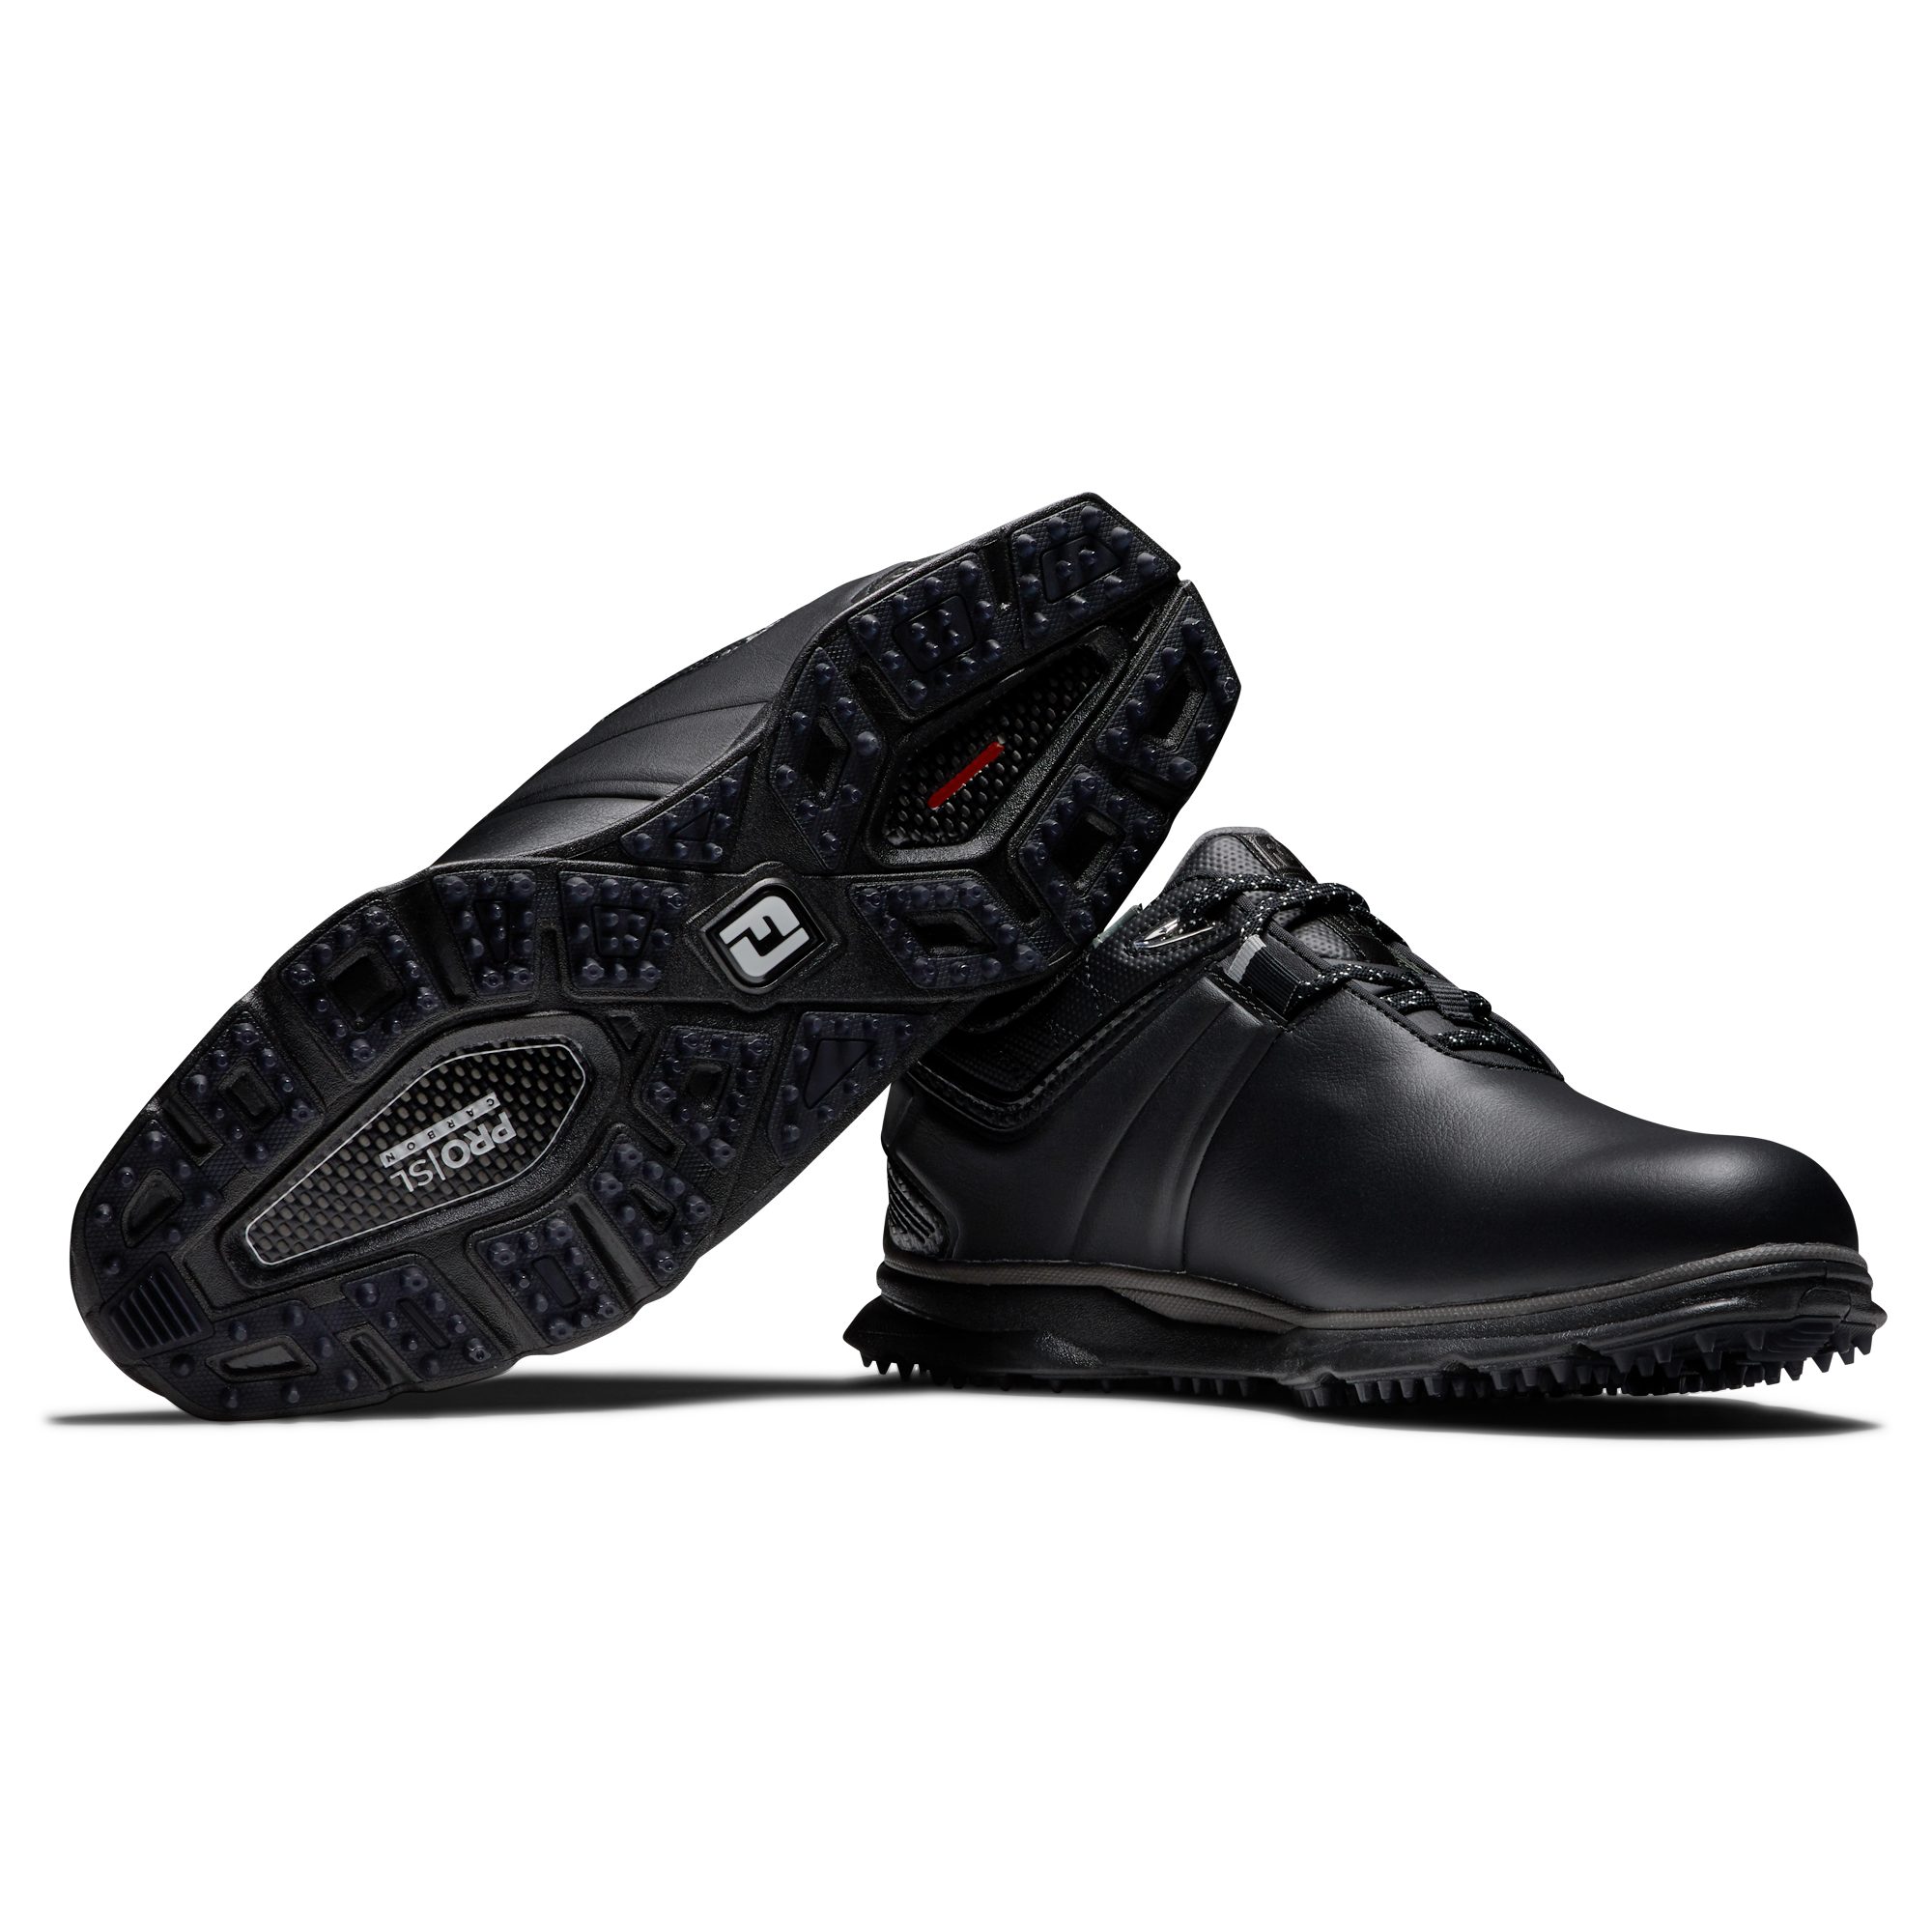 Pro|SL Carbon | Popular Golf Shoes Worn By the Pros | FootJoy